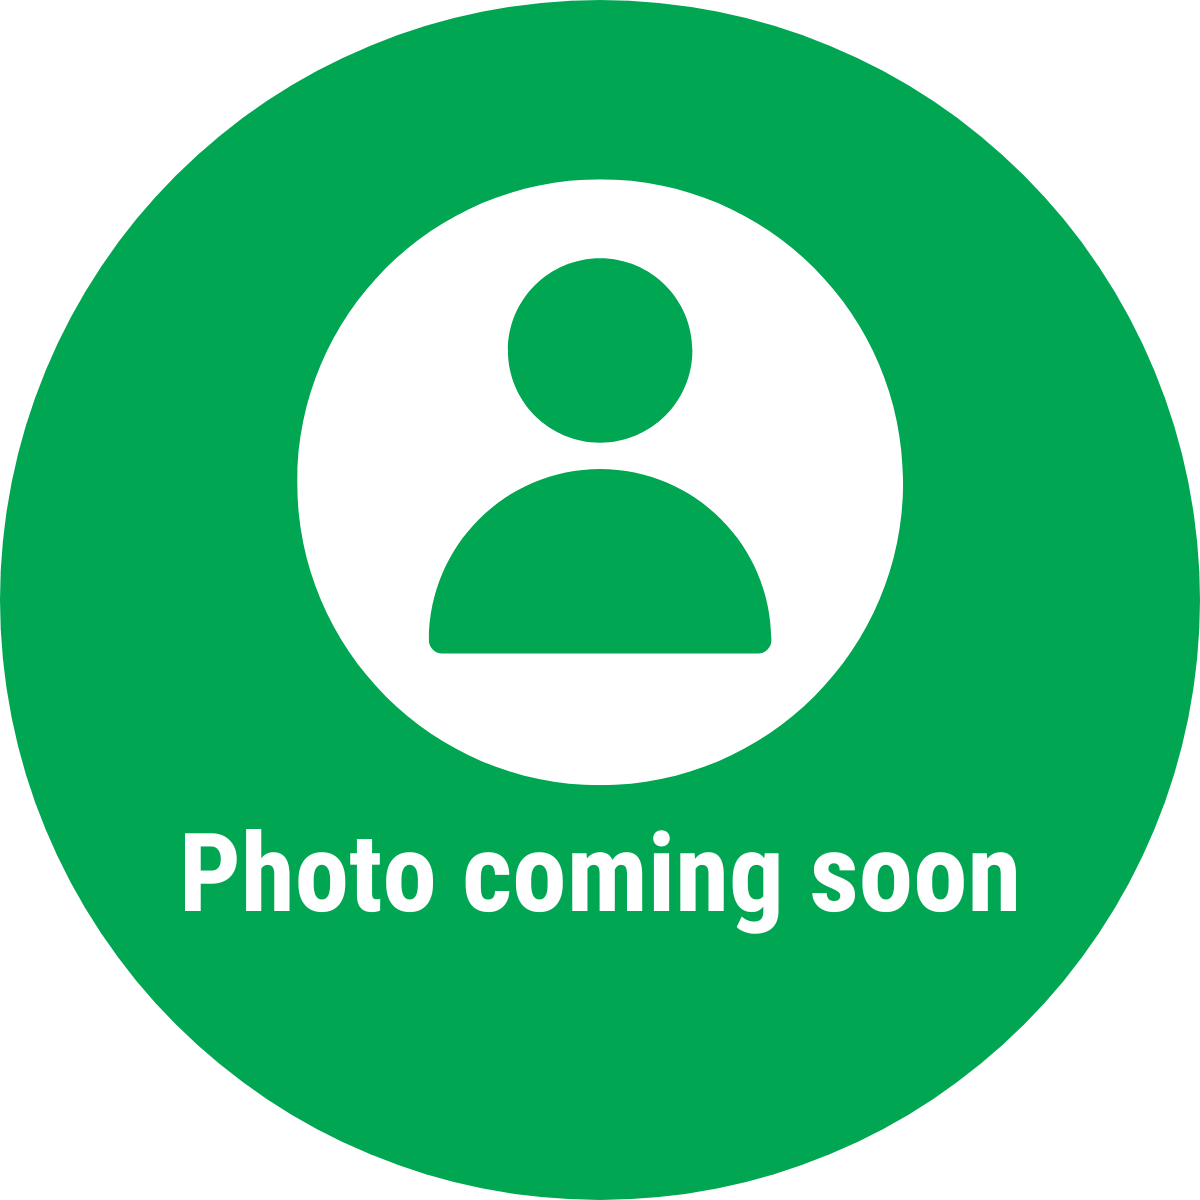 A green circle with a person icon in white and white text saying "Photo coming soon".